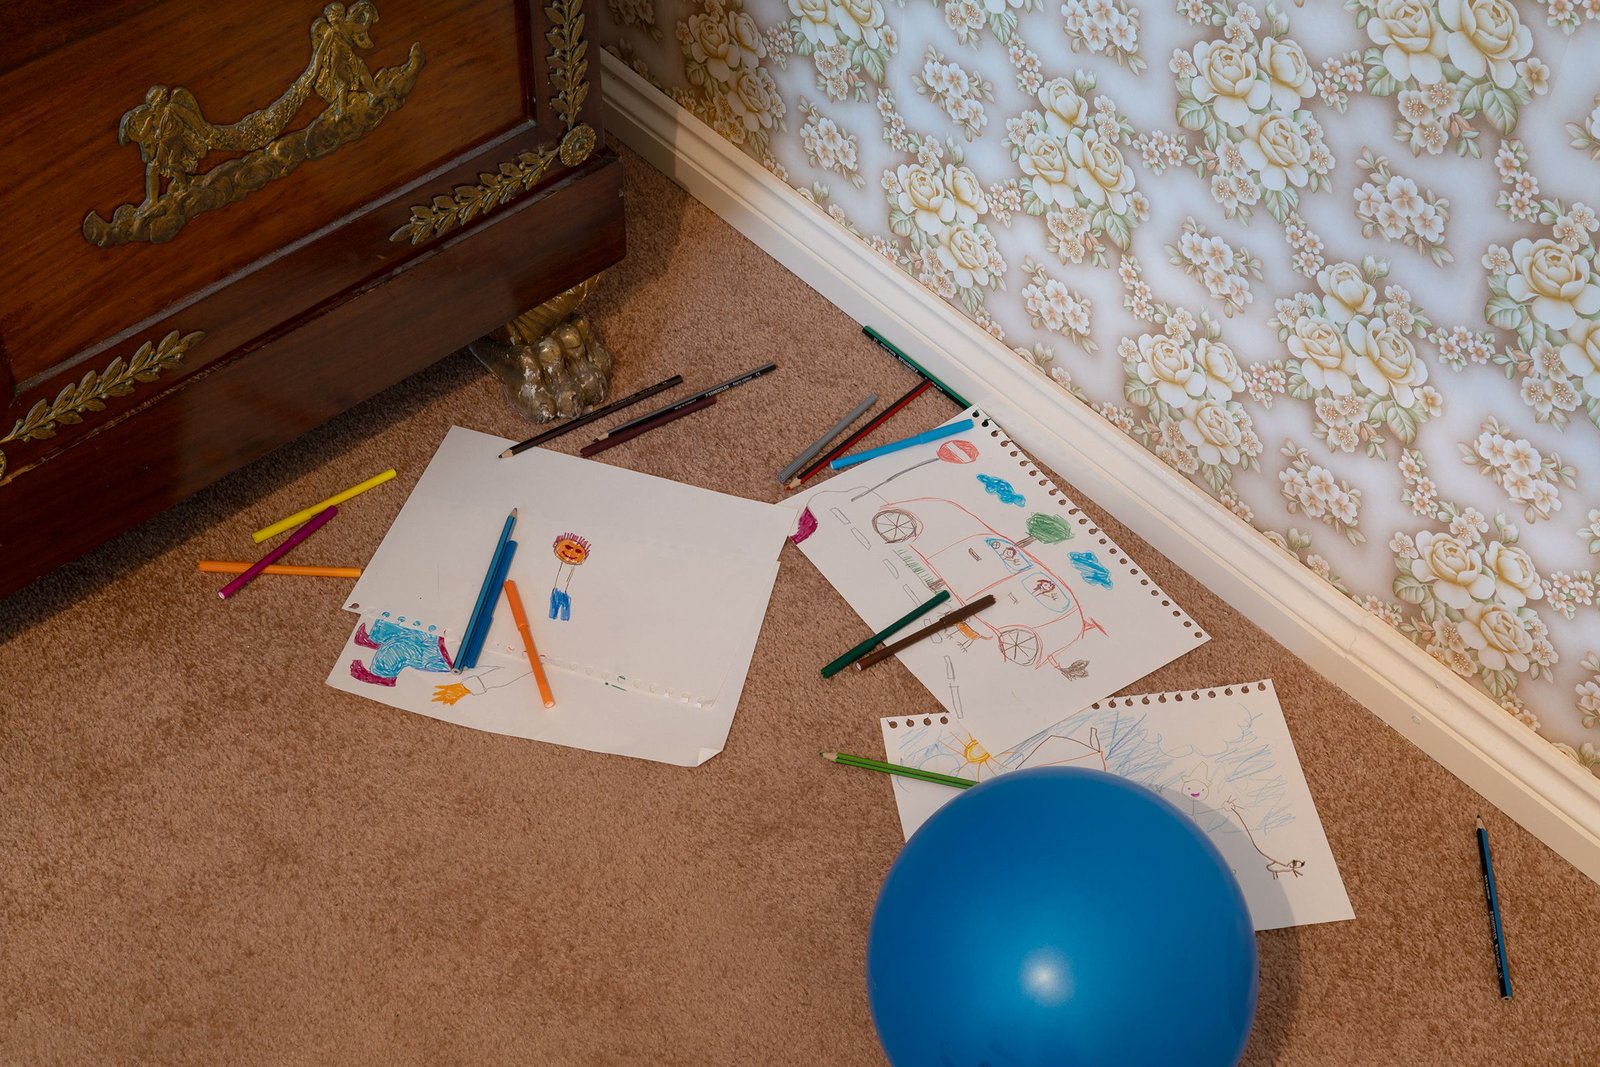 messy floor with children's drawings and scattered pencils